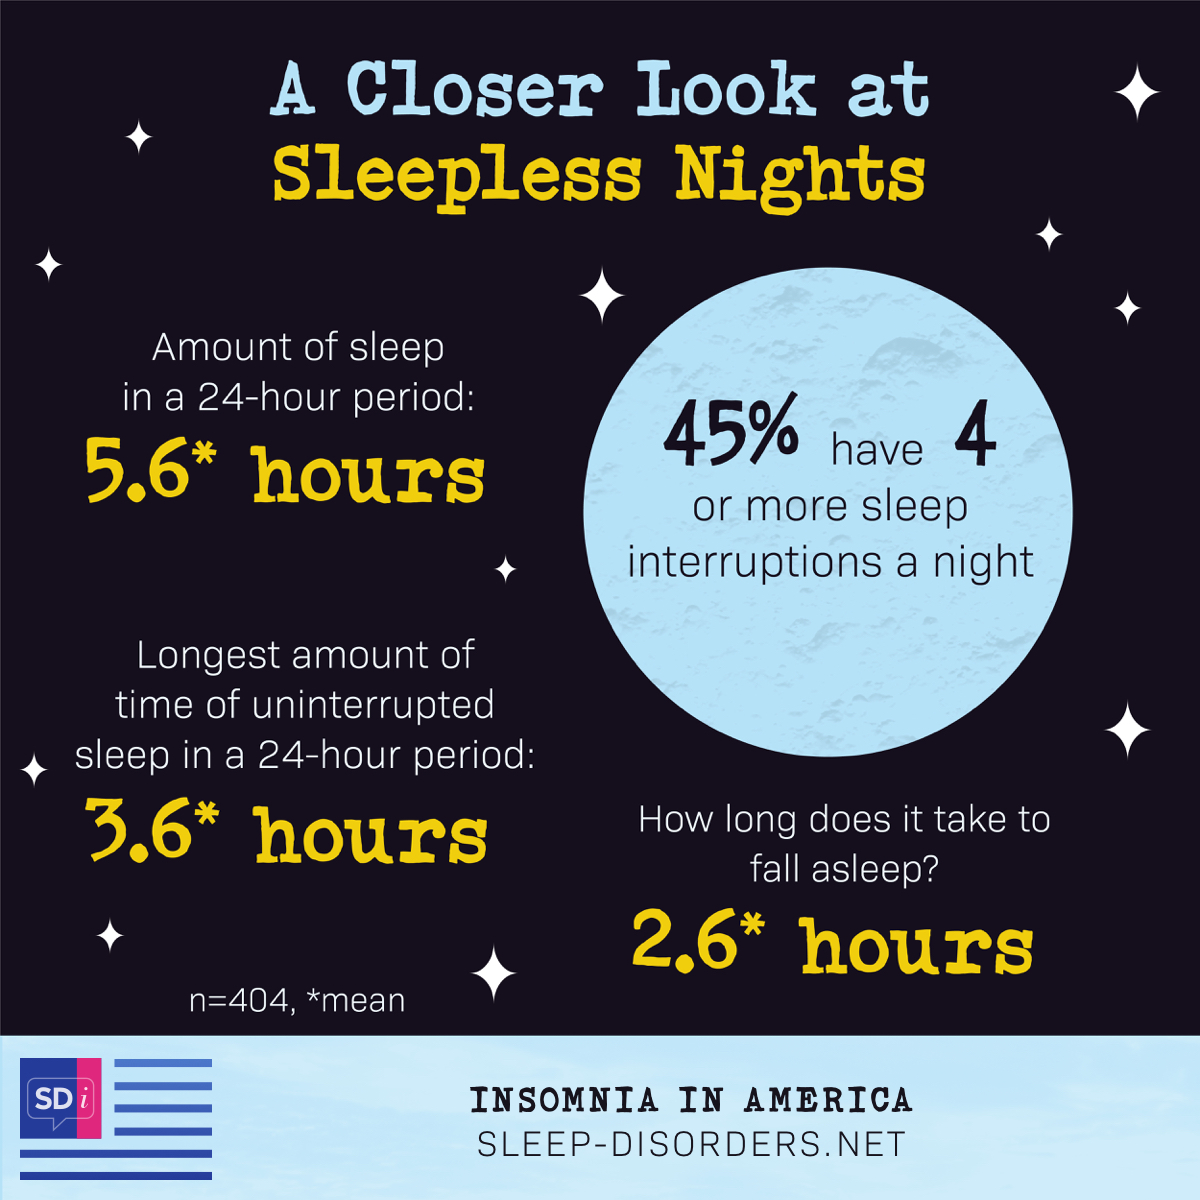 Those with insomnia get an average of 5.6 hours in a 24 hour period. Longest amount of uninterrupted sleep is 3.6 hours in a 24 hour period. 45% have four or more sleep interruptions per night. On average, it takes them 2.6 hours to fall asleep at night.